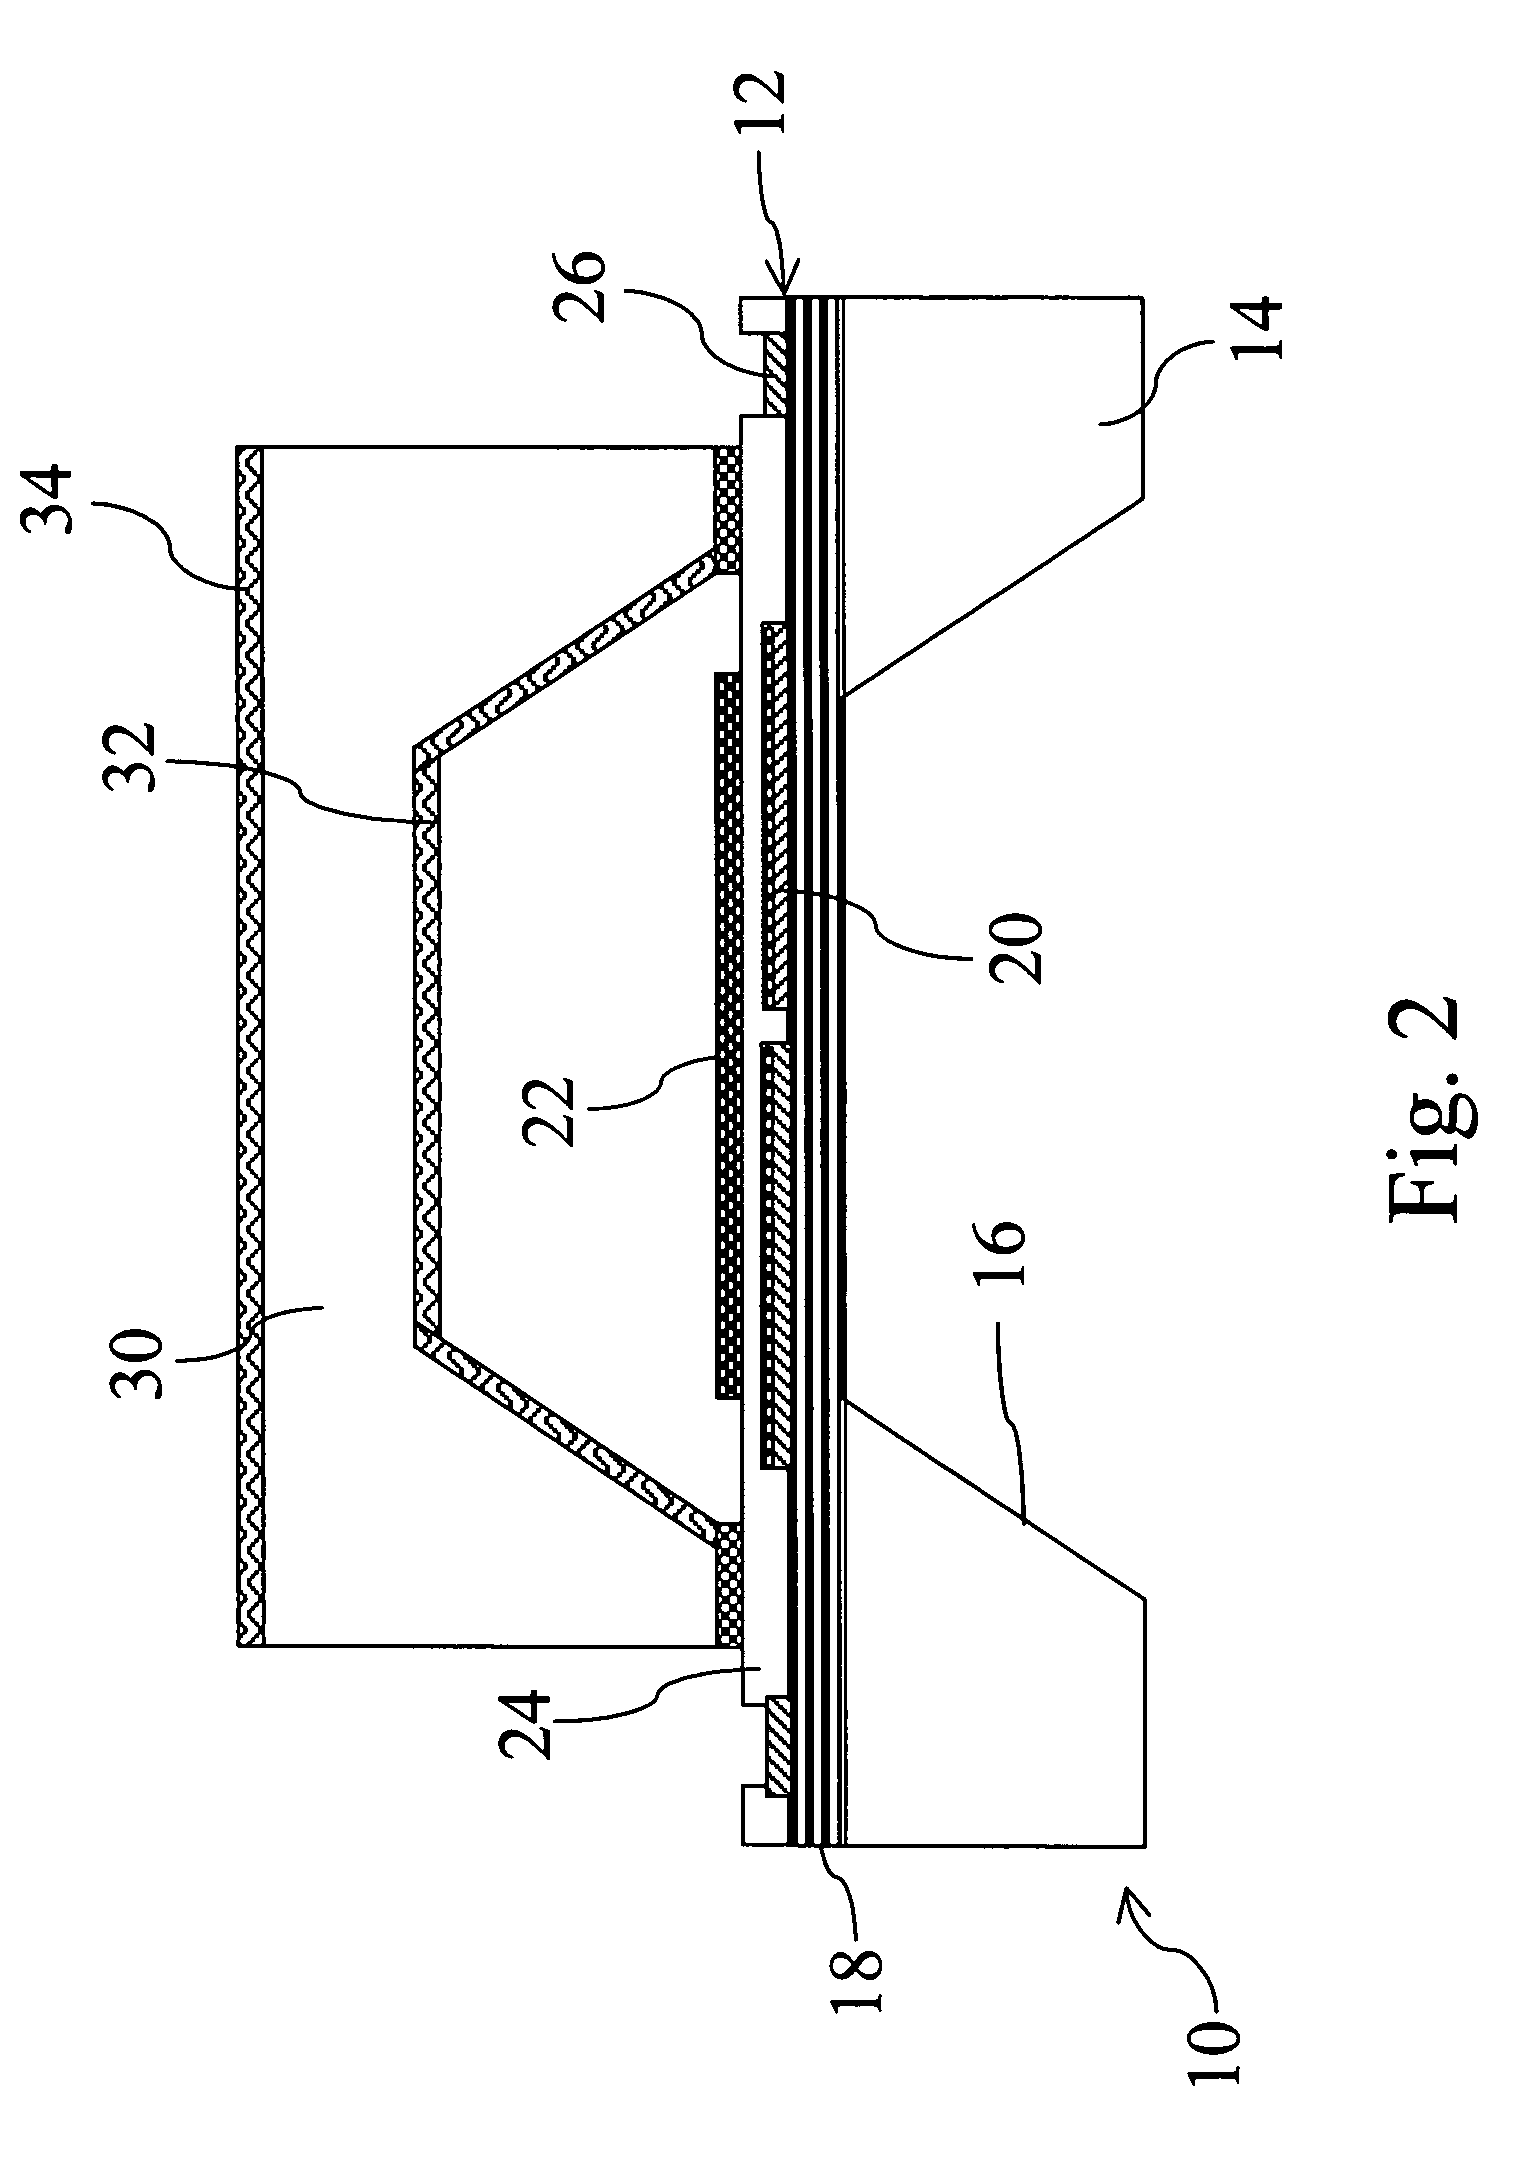 Thermopile IR detector package structure